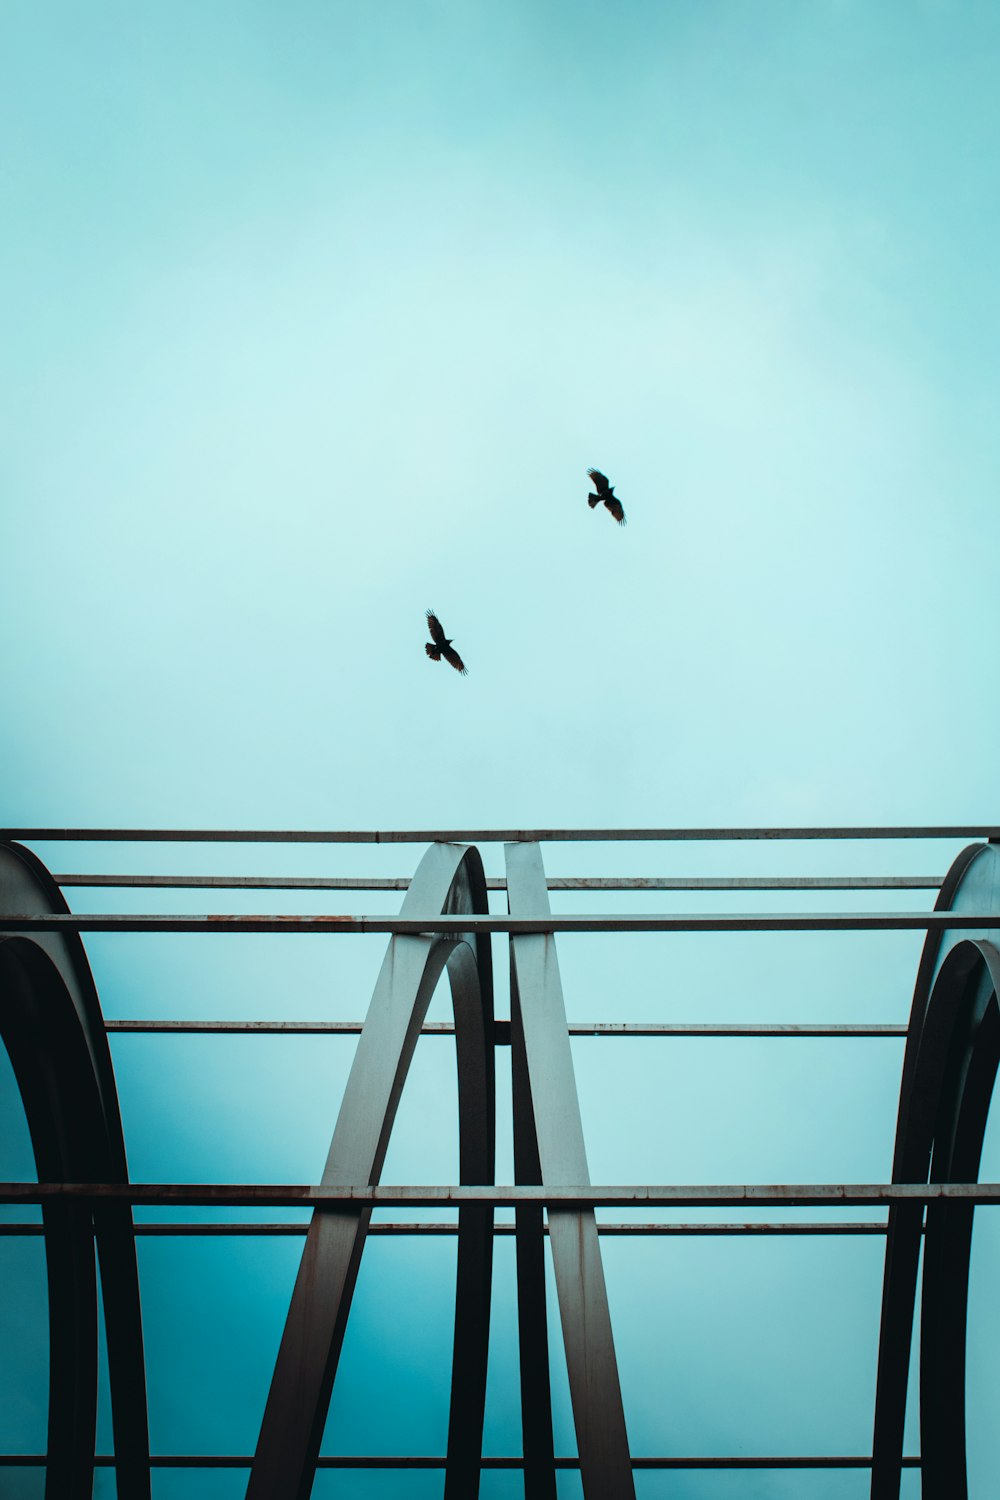 two birds are flying over a metal bridge